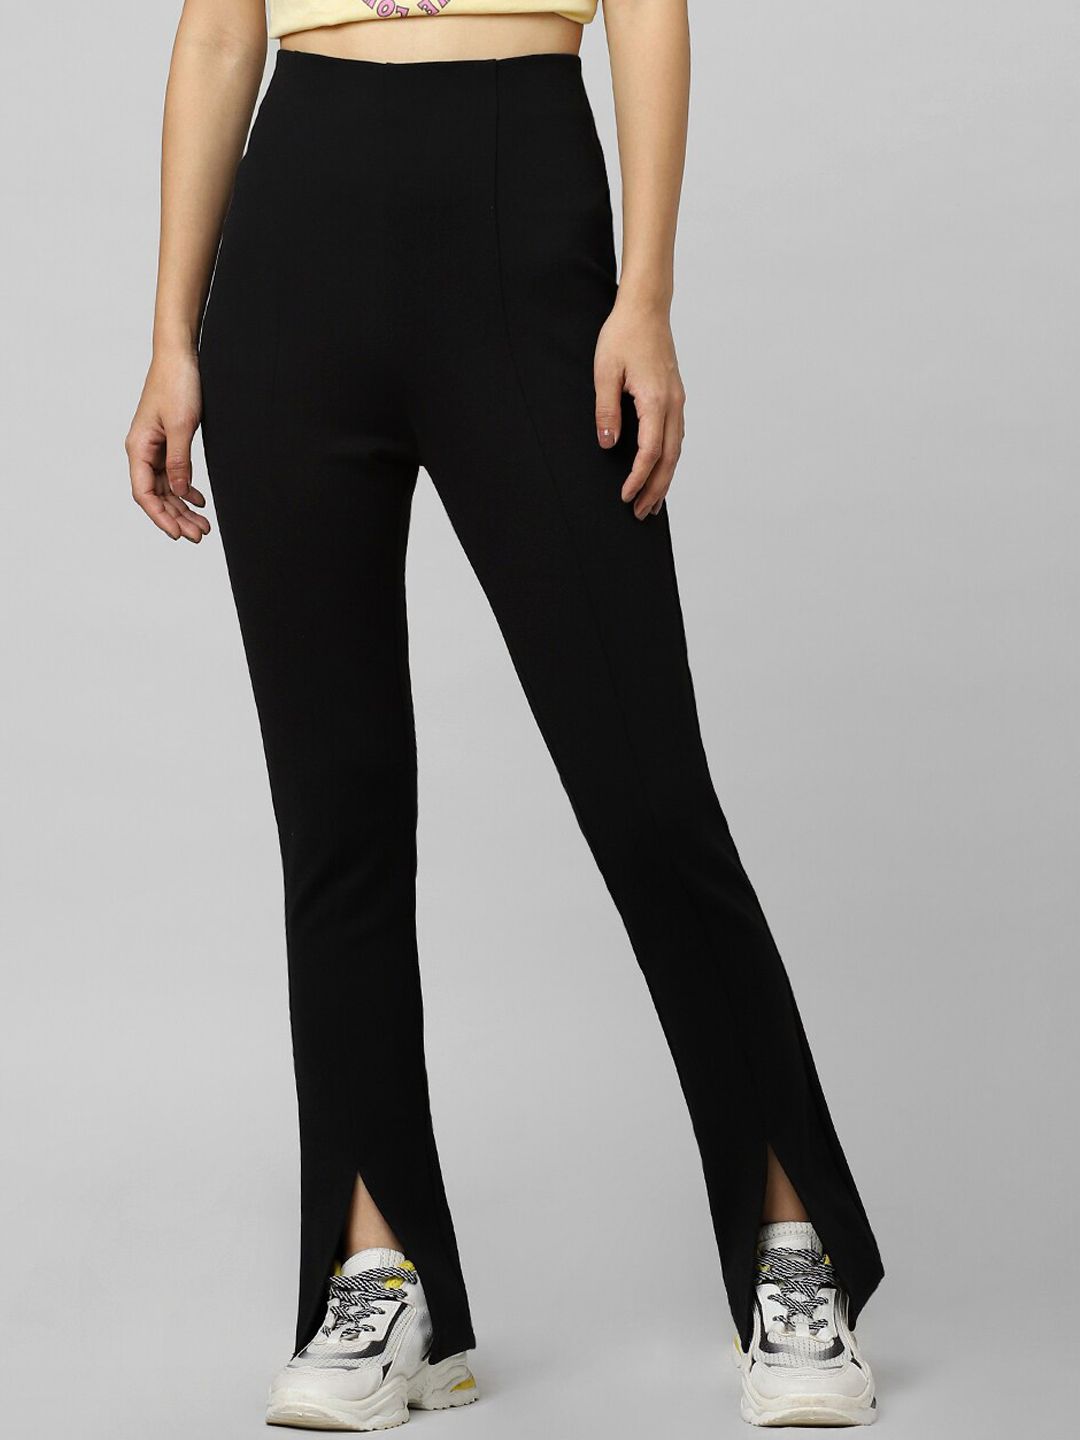 ONLY Women Black Slit Trousers Price in India